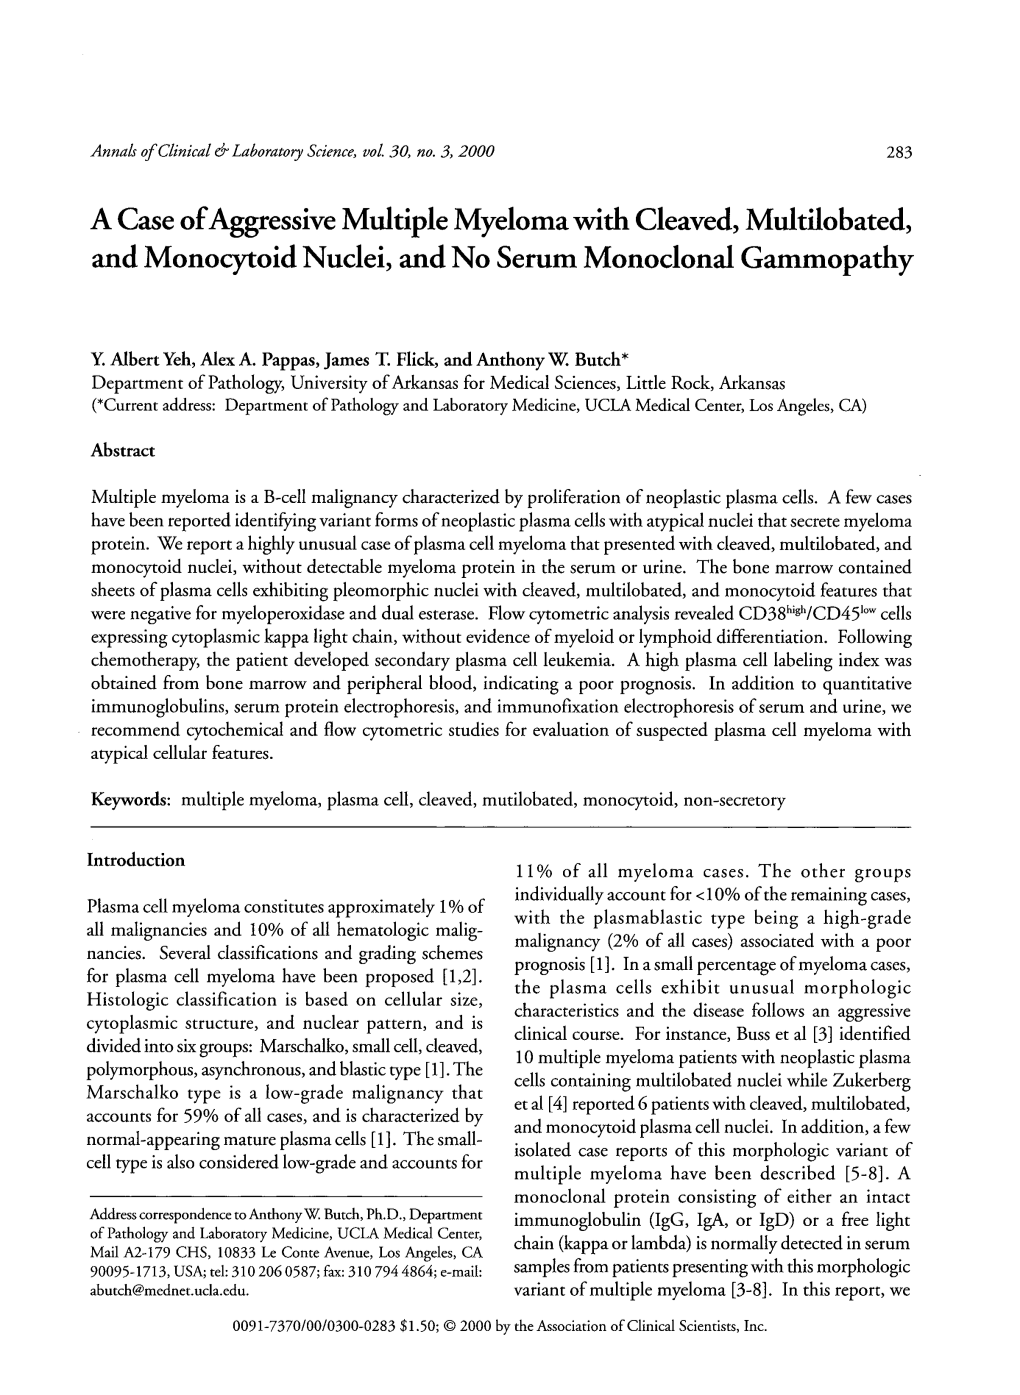 A Case of Aggressive Multiple Myeloma with Cleaved, Multilobated, and Monocytoid Nuclei, and No Serum Monoclonal Gammopathy